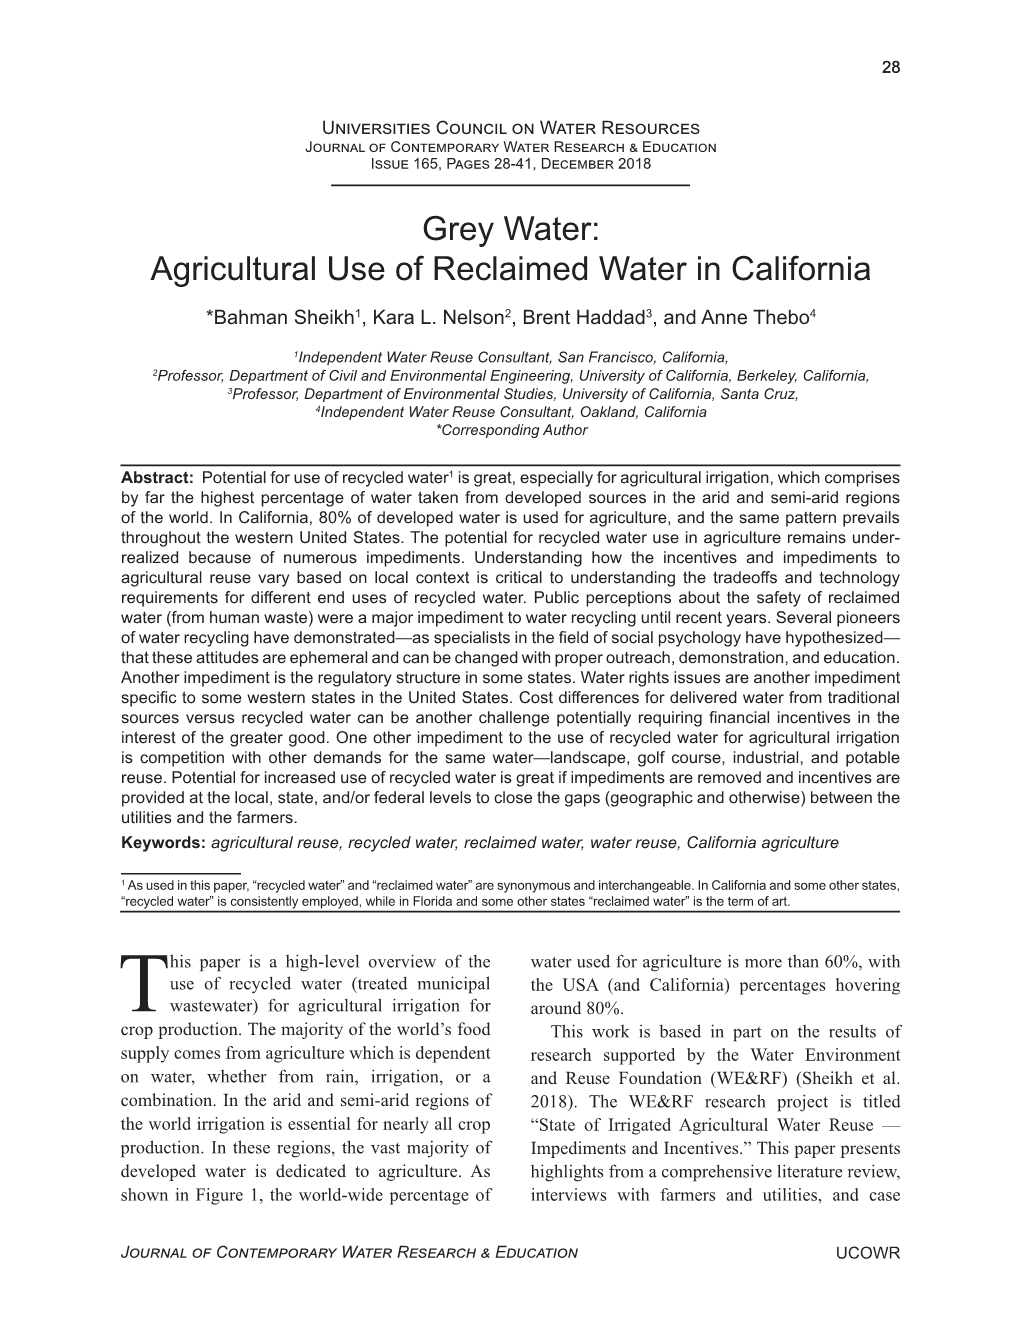 Grey Water: Agricultural Use of Reclaimed Water in California *Bahman Sheikh1, Kara L